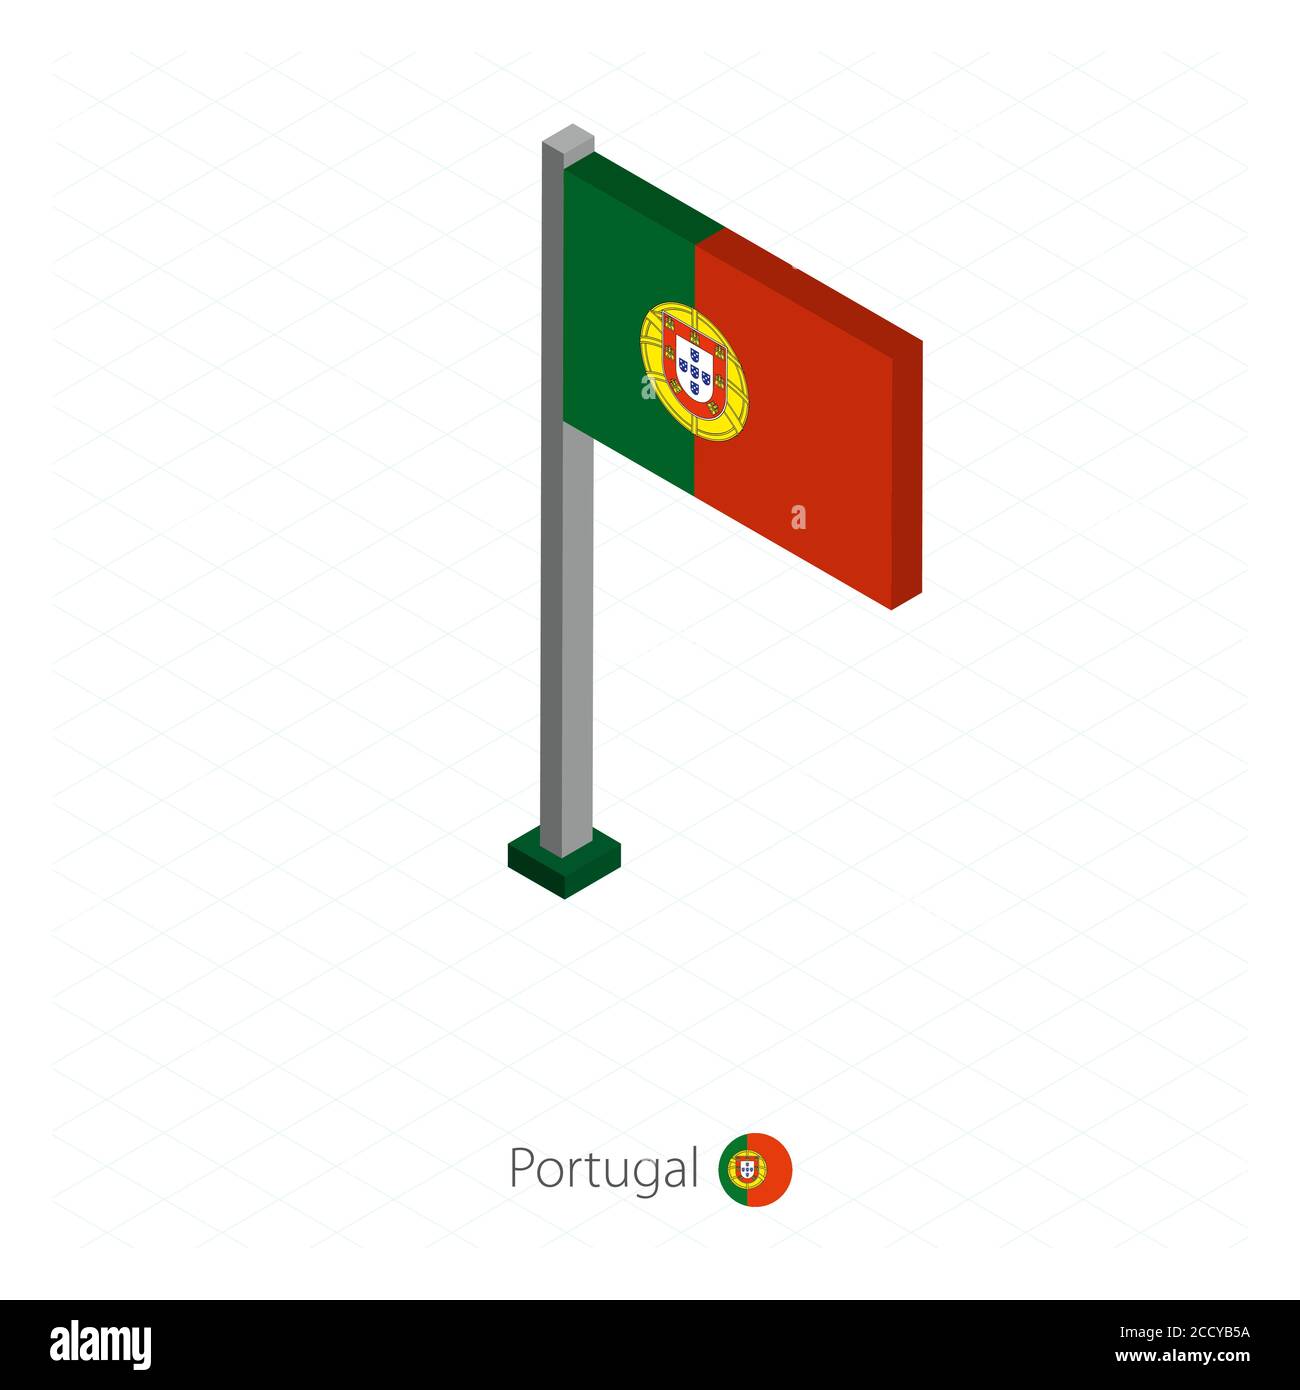 Portugal Flag on Flagpole in Isometric dimension. Isometric blue background. Vector illustration. Stock Vector